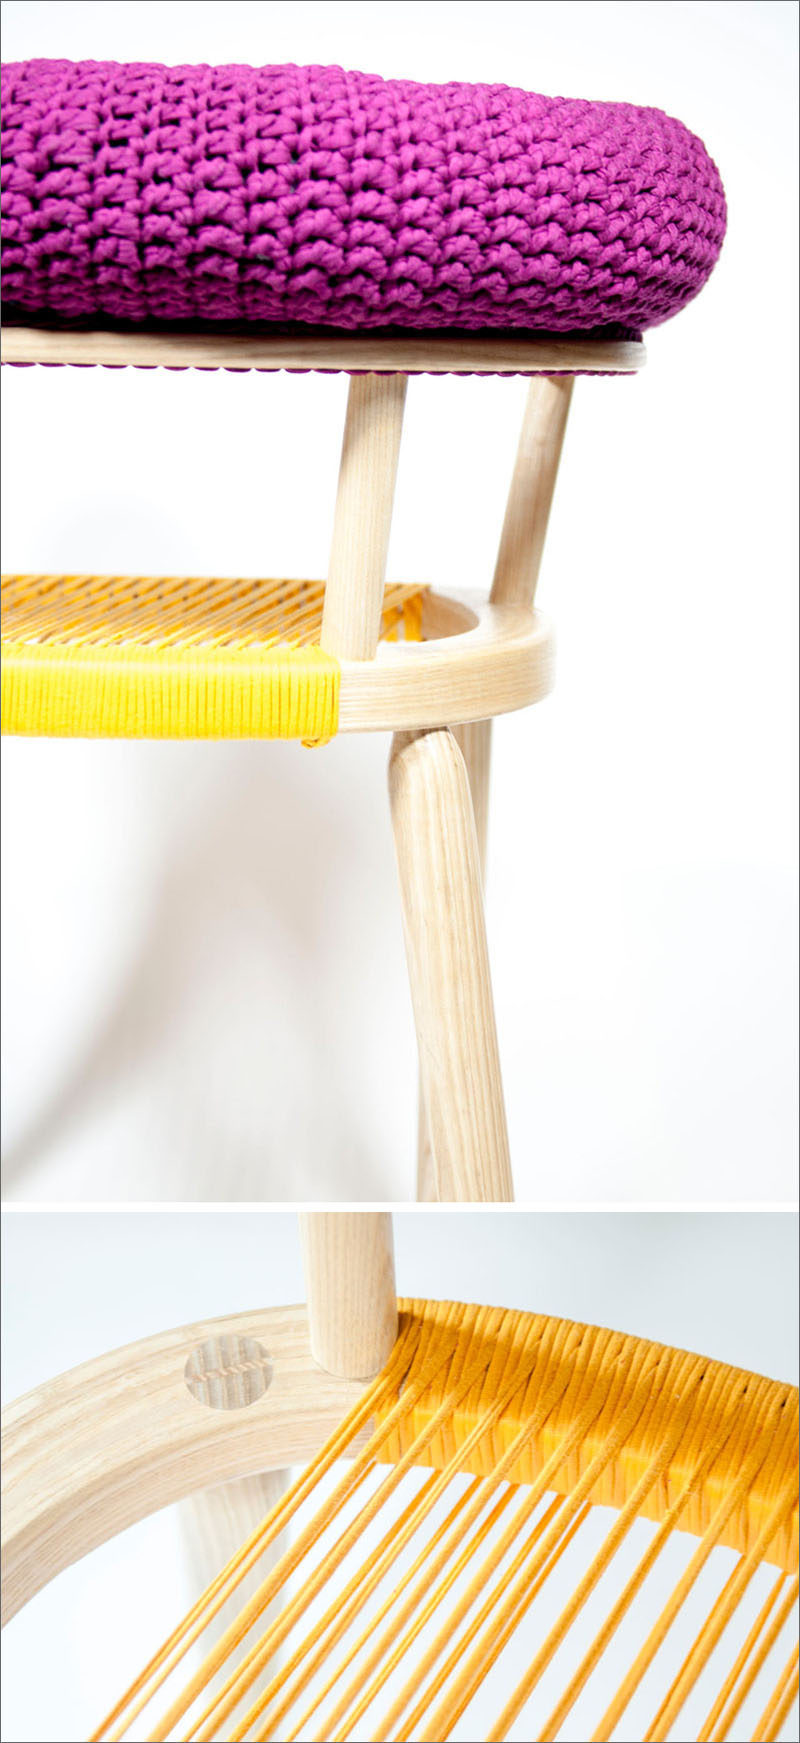 In this armchair design, crochet has been used to create the upper cushion that sits on the armrest. For the seat of the chair, yellow yarn has been wrapped around the wooden chair frame.